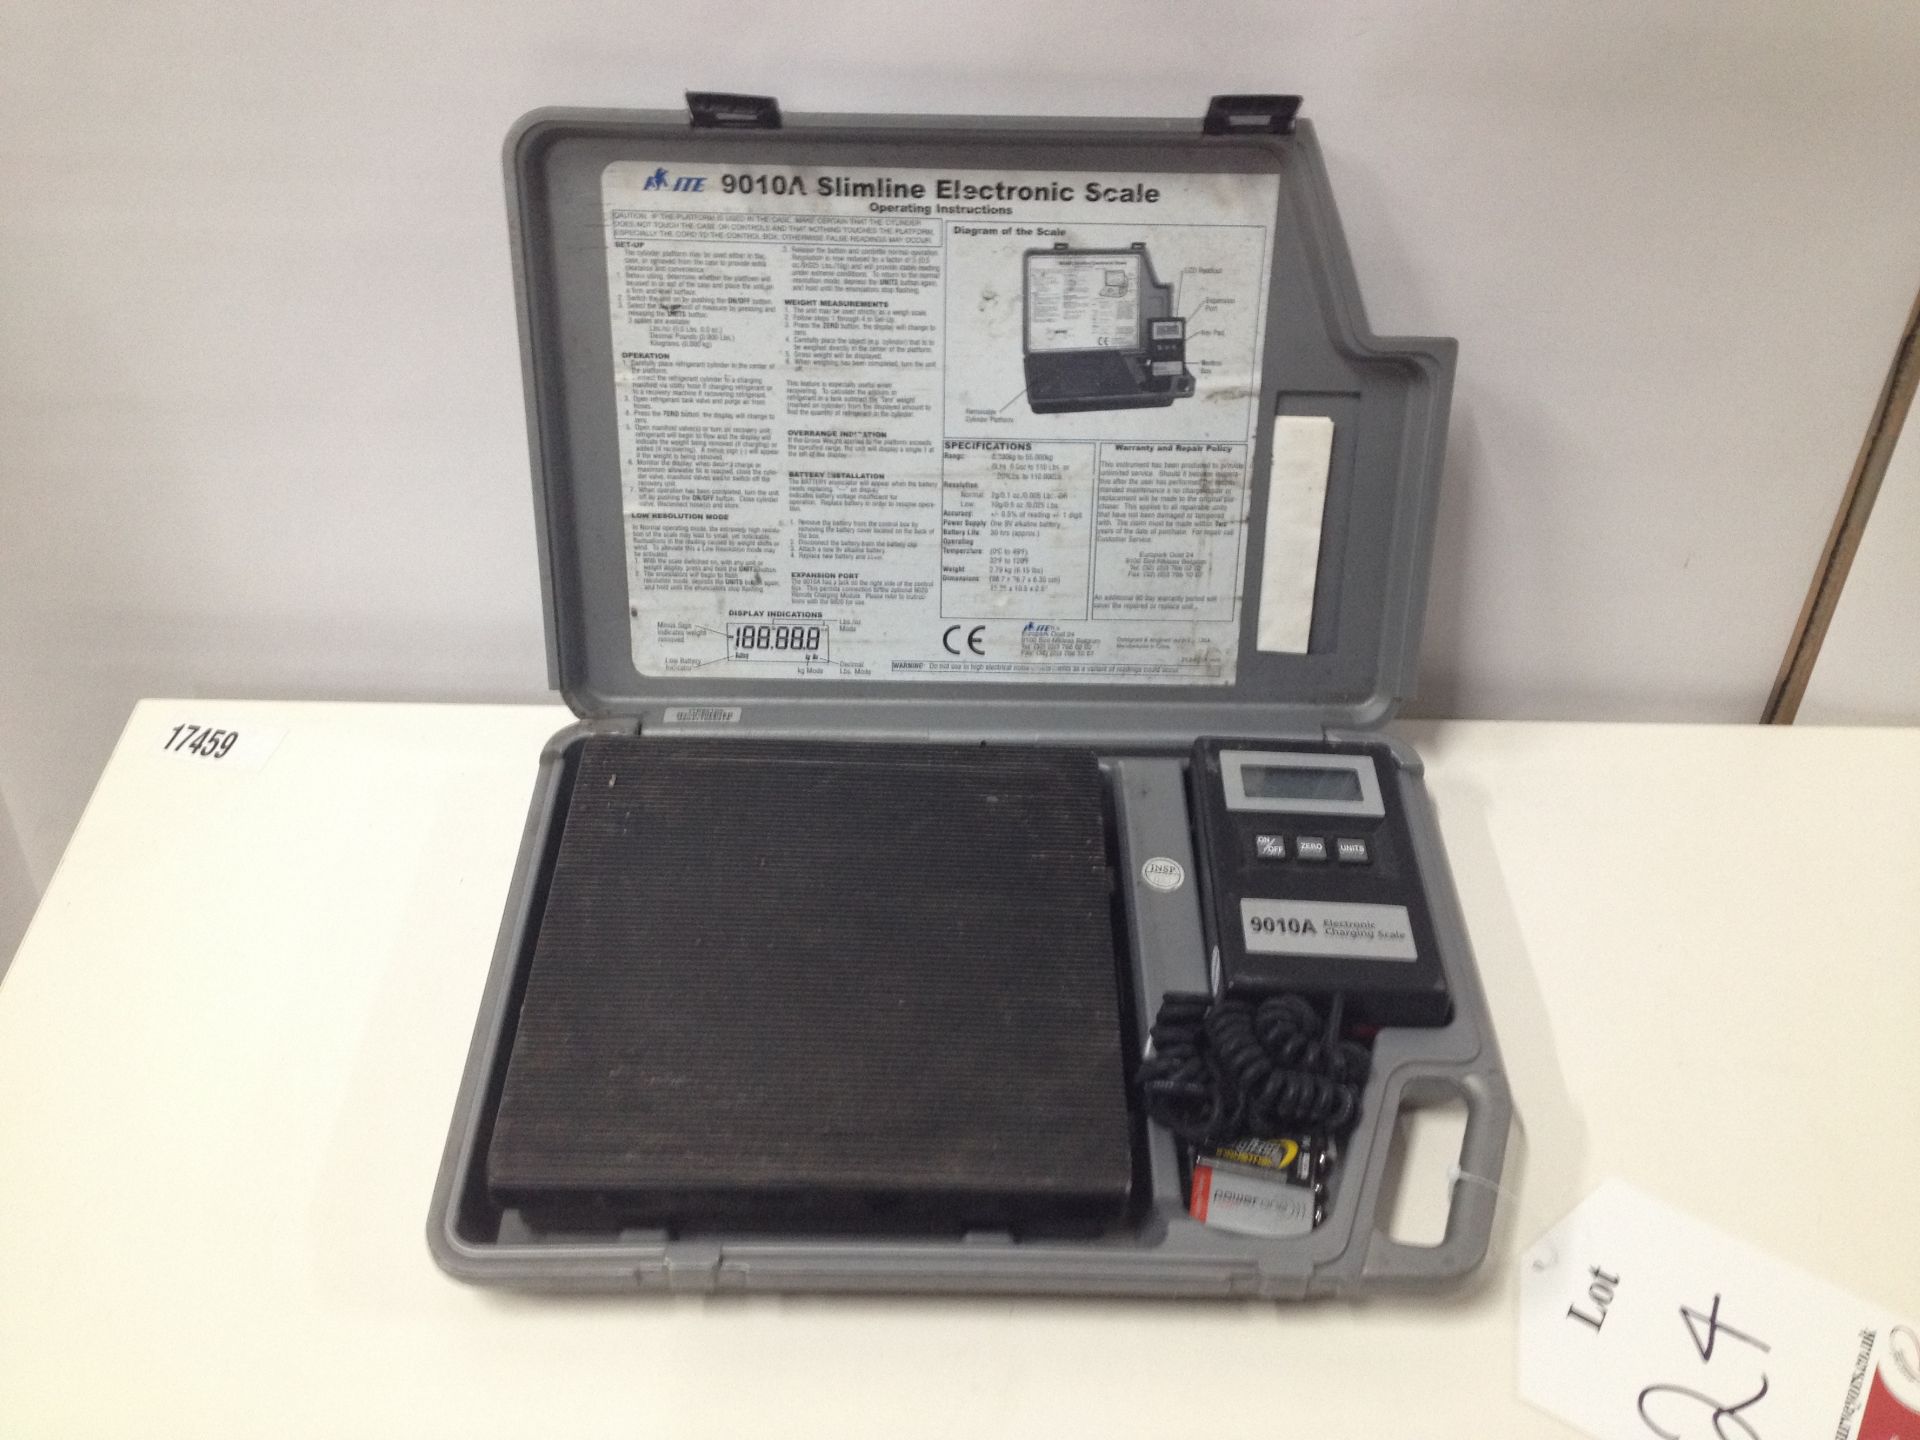 Site Slimline Electronic Scales - Image 2 of 4